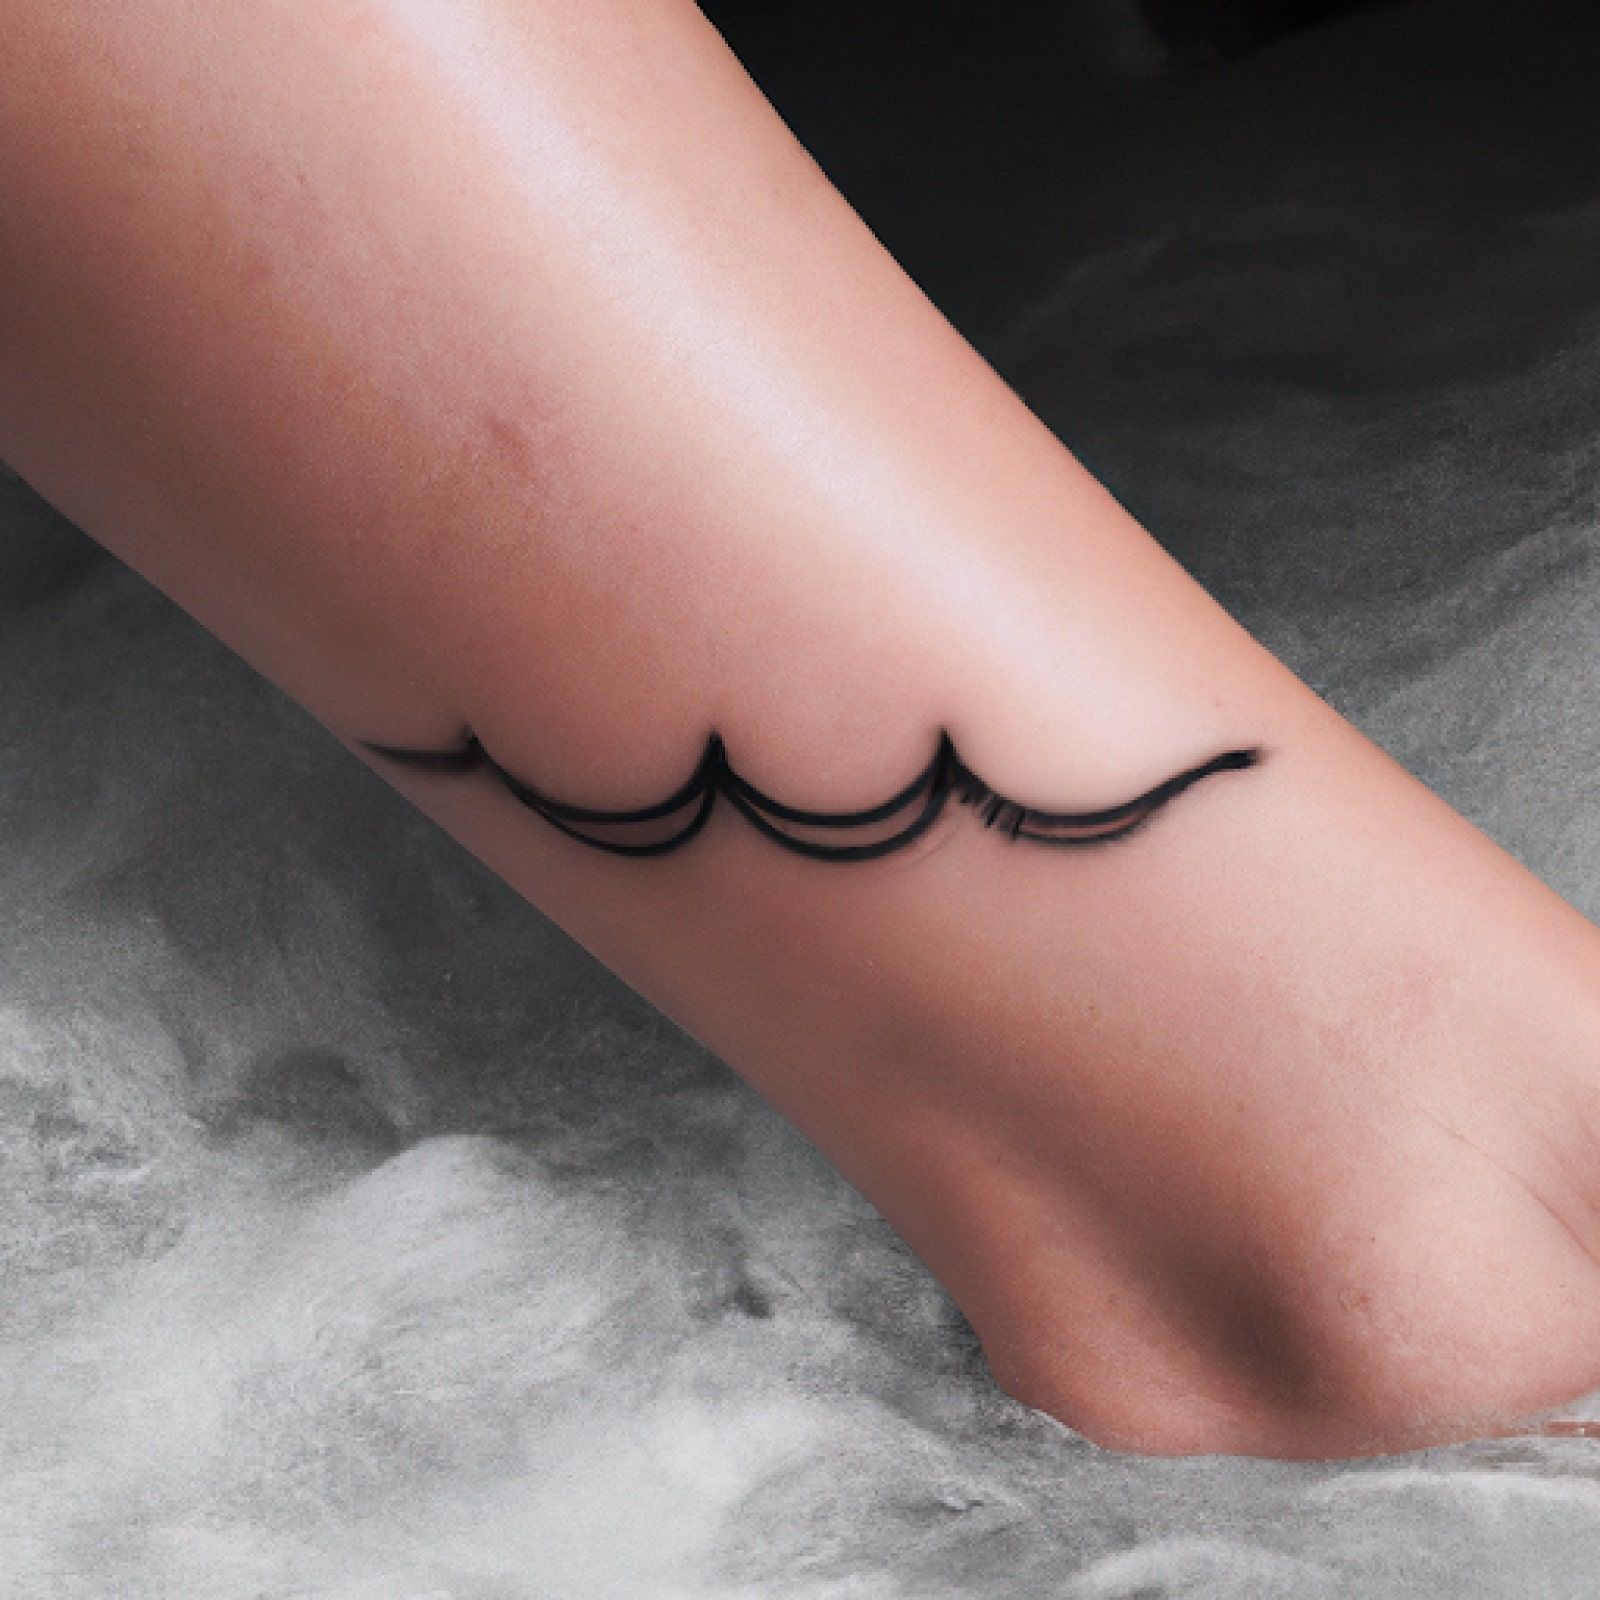 Wave tattoo on leg for women